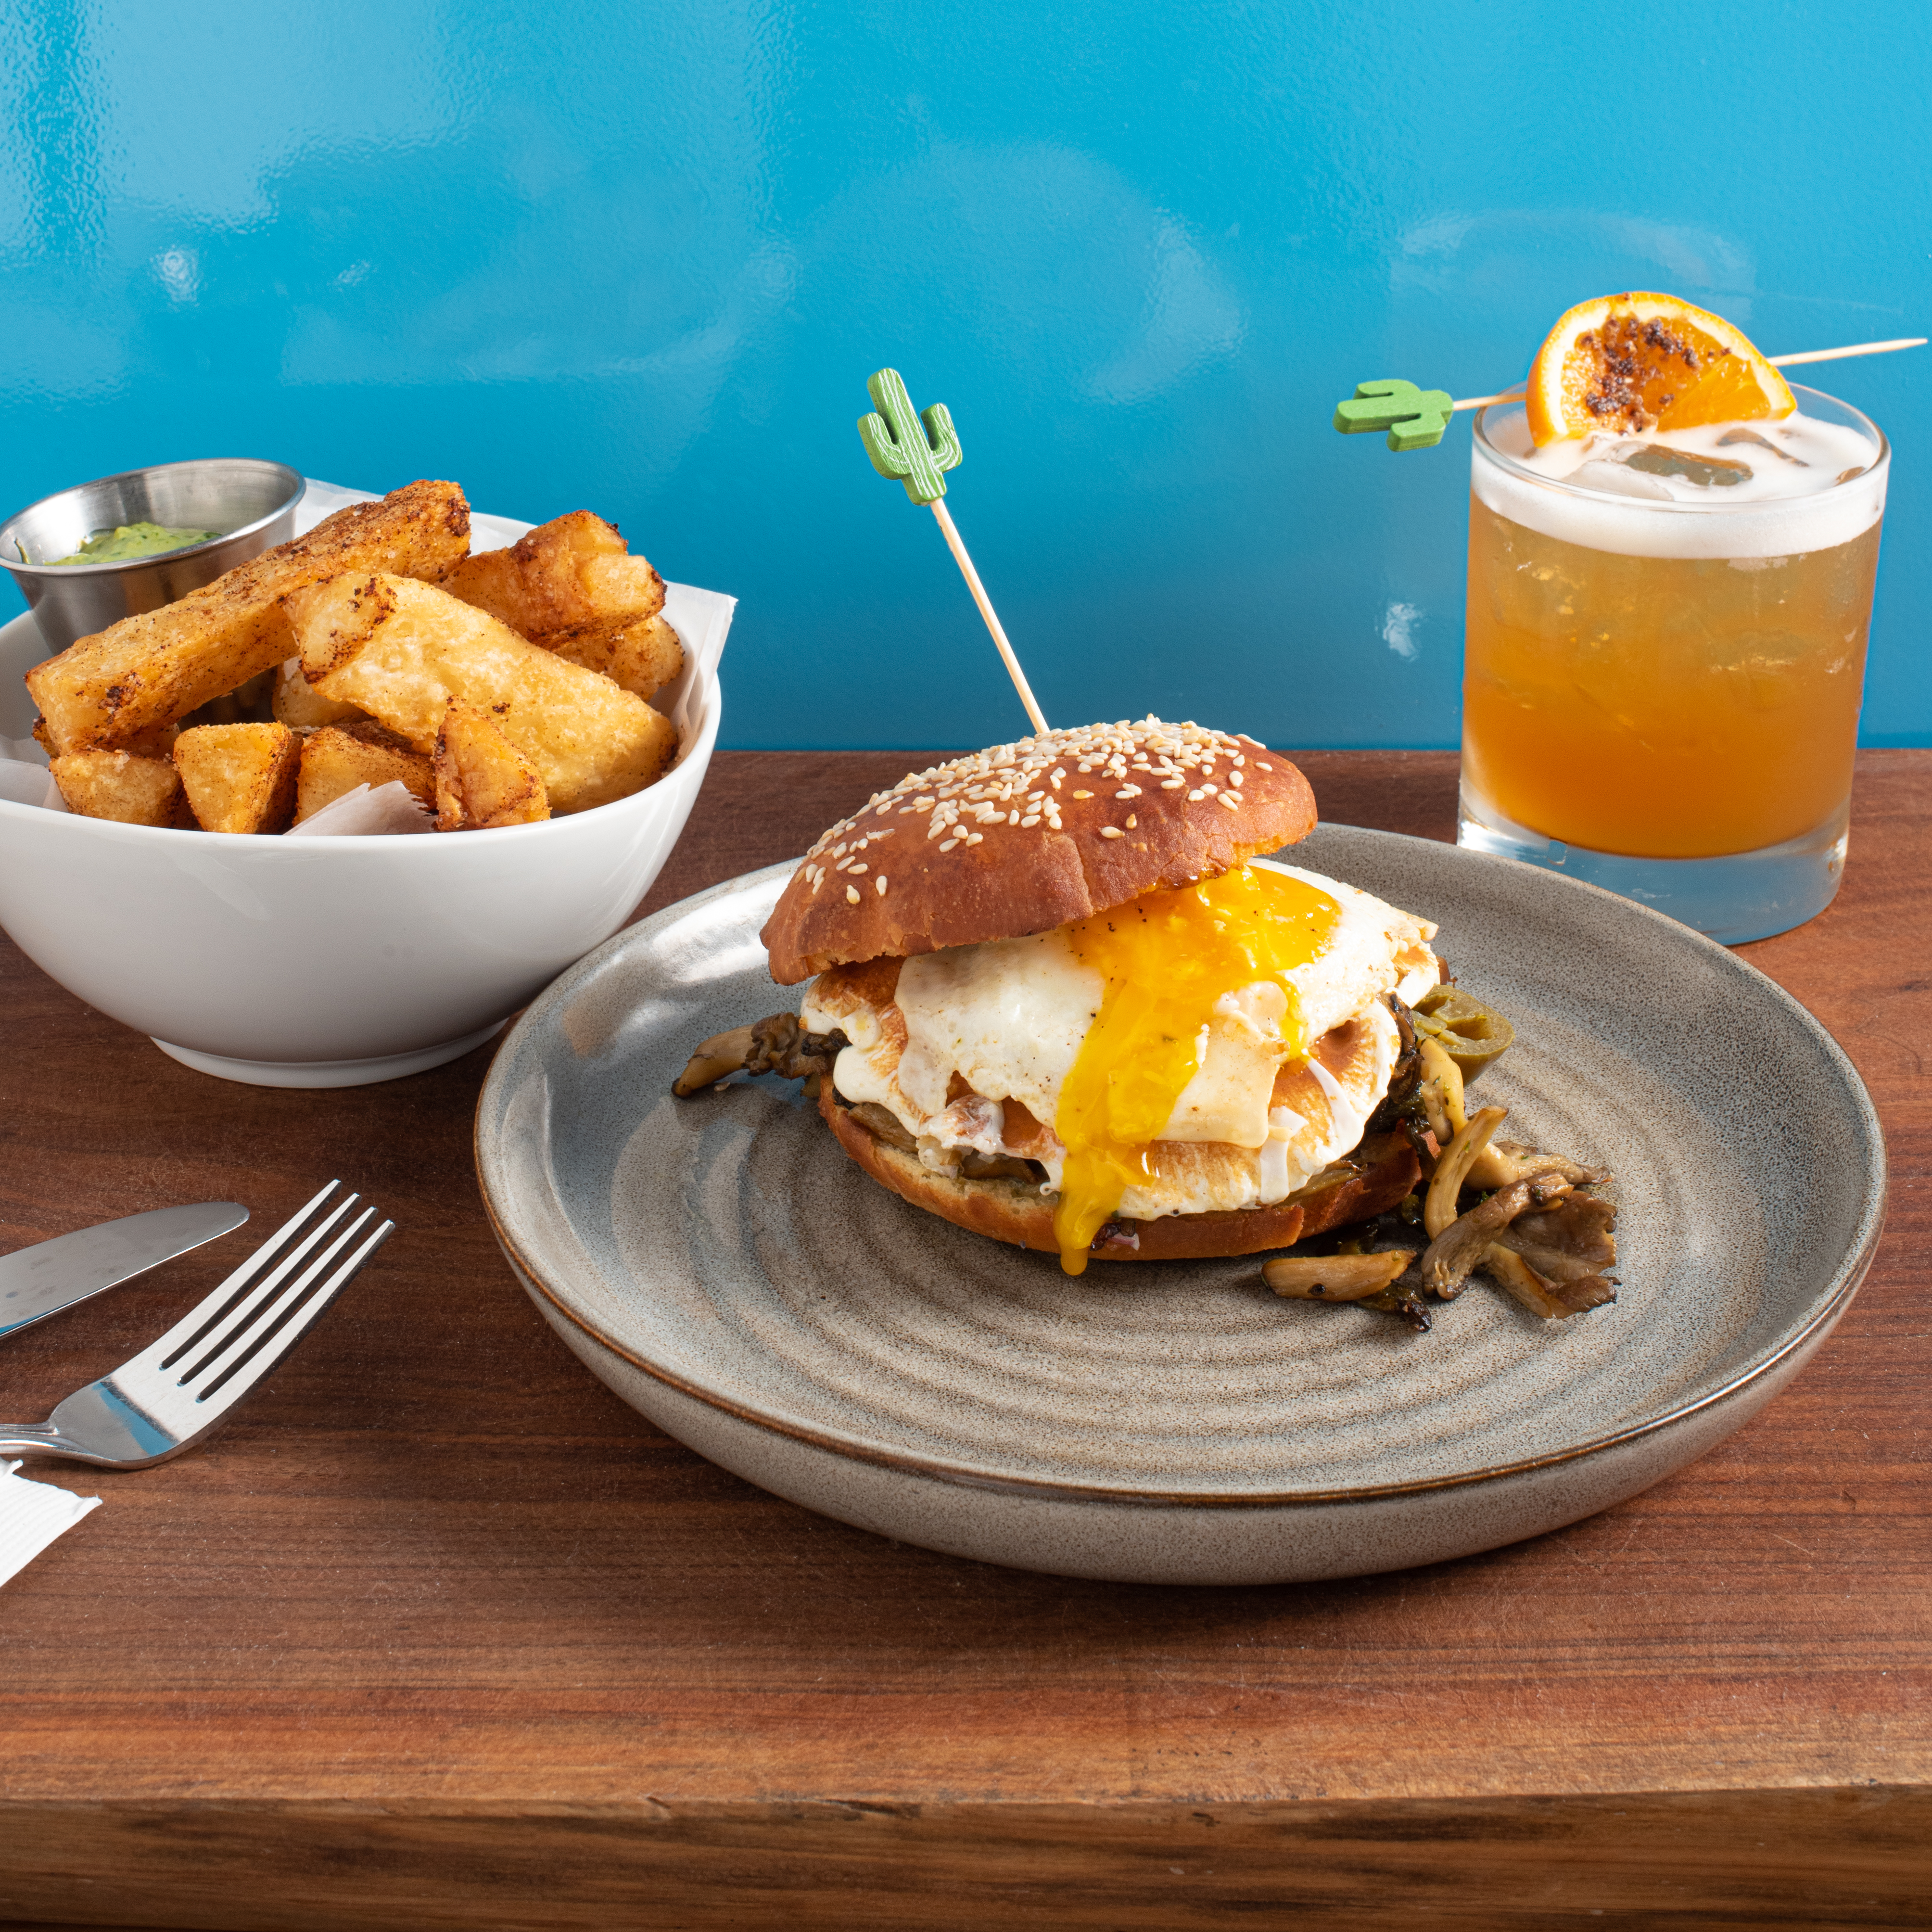 A breakfast sandwich with a gooey egg yolk on a bun is front and center, with an orange cocktail with a frothy top, and a white bowl of crispy potatoes in the background